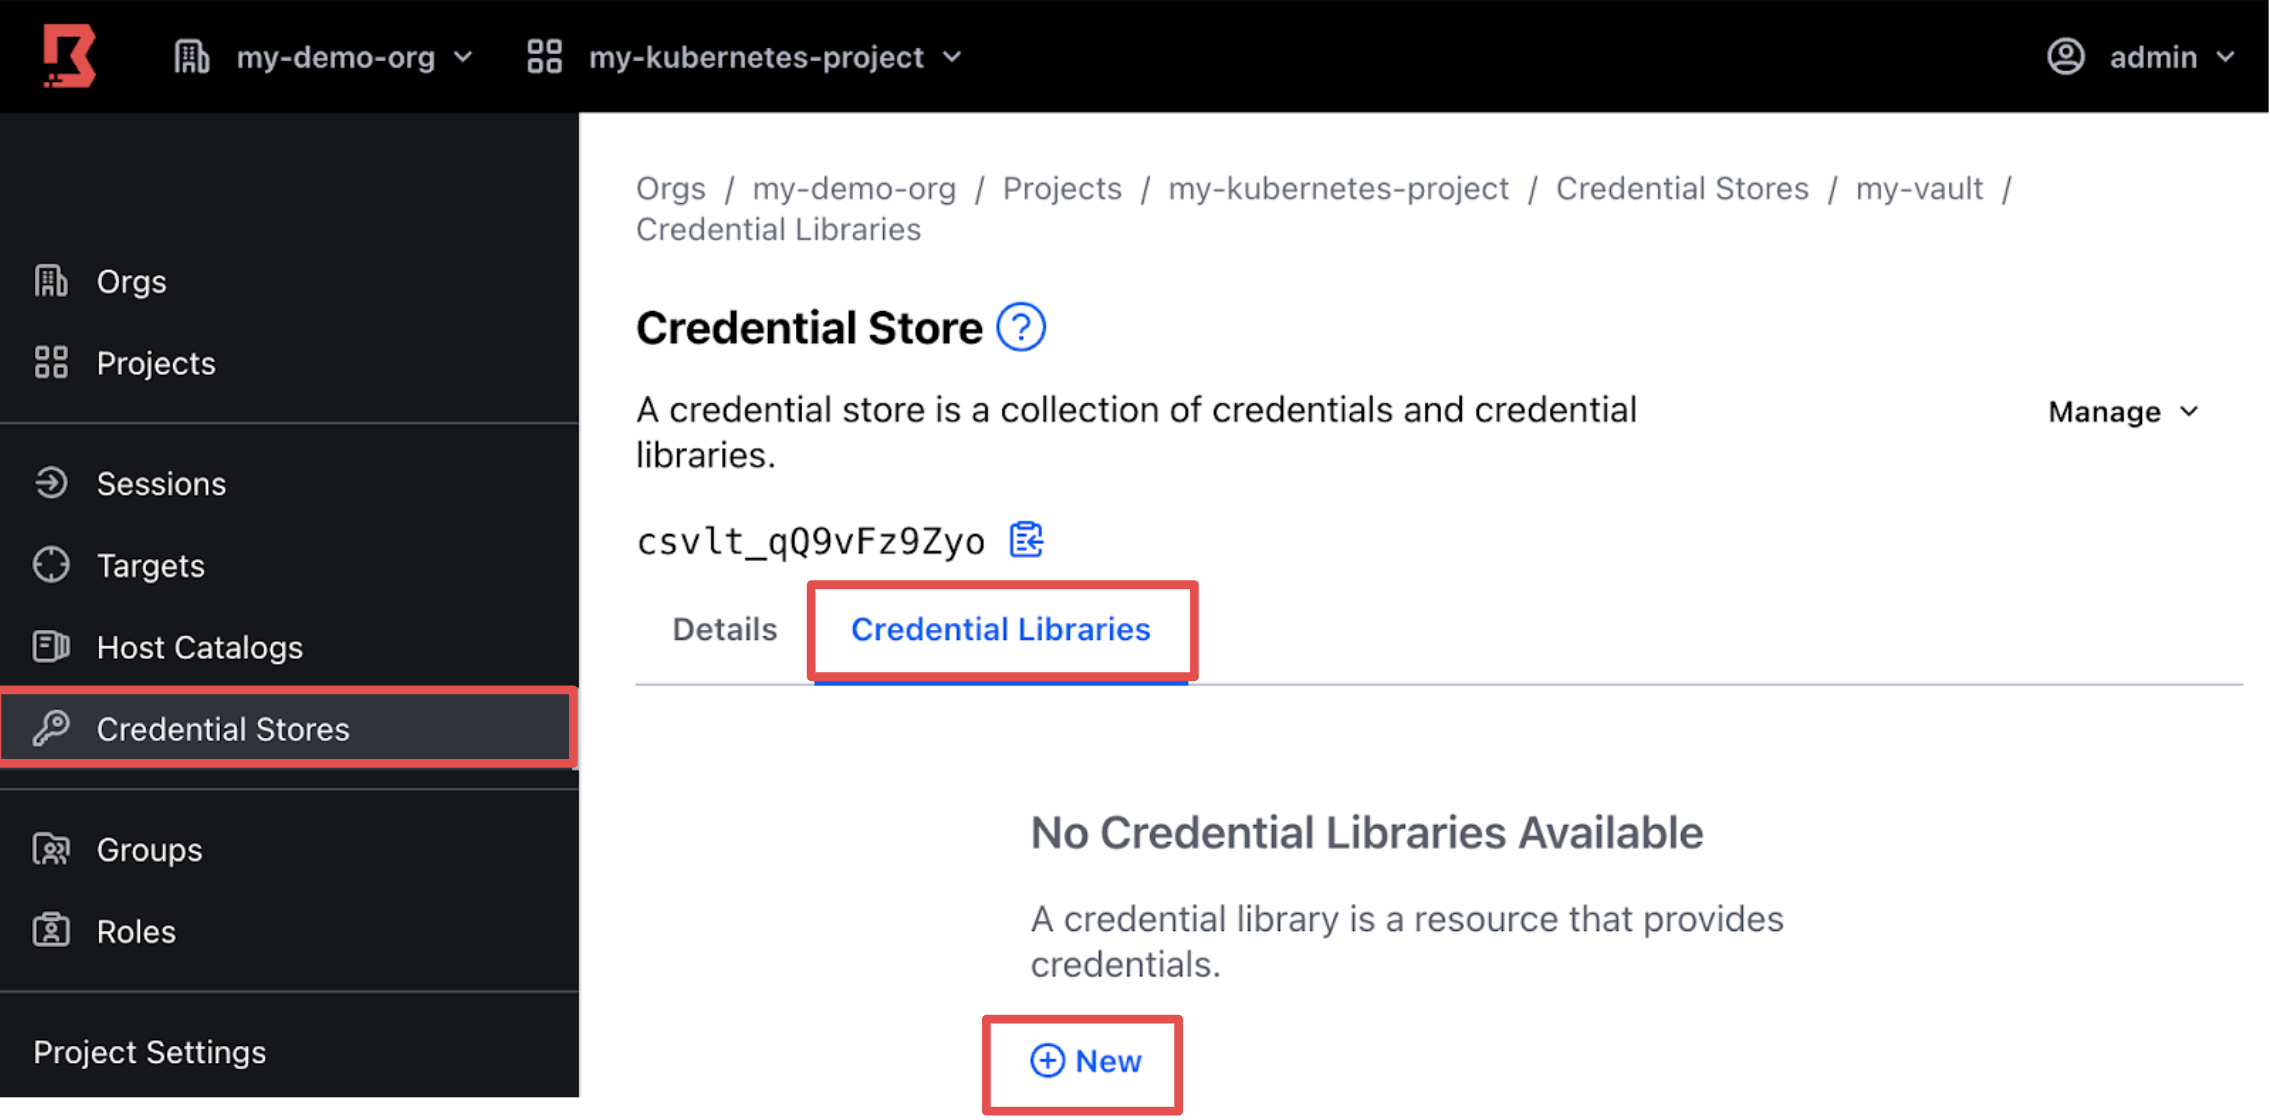 Credential libraries